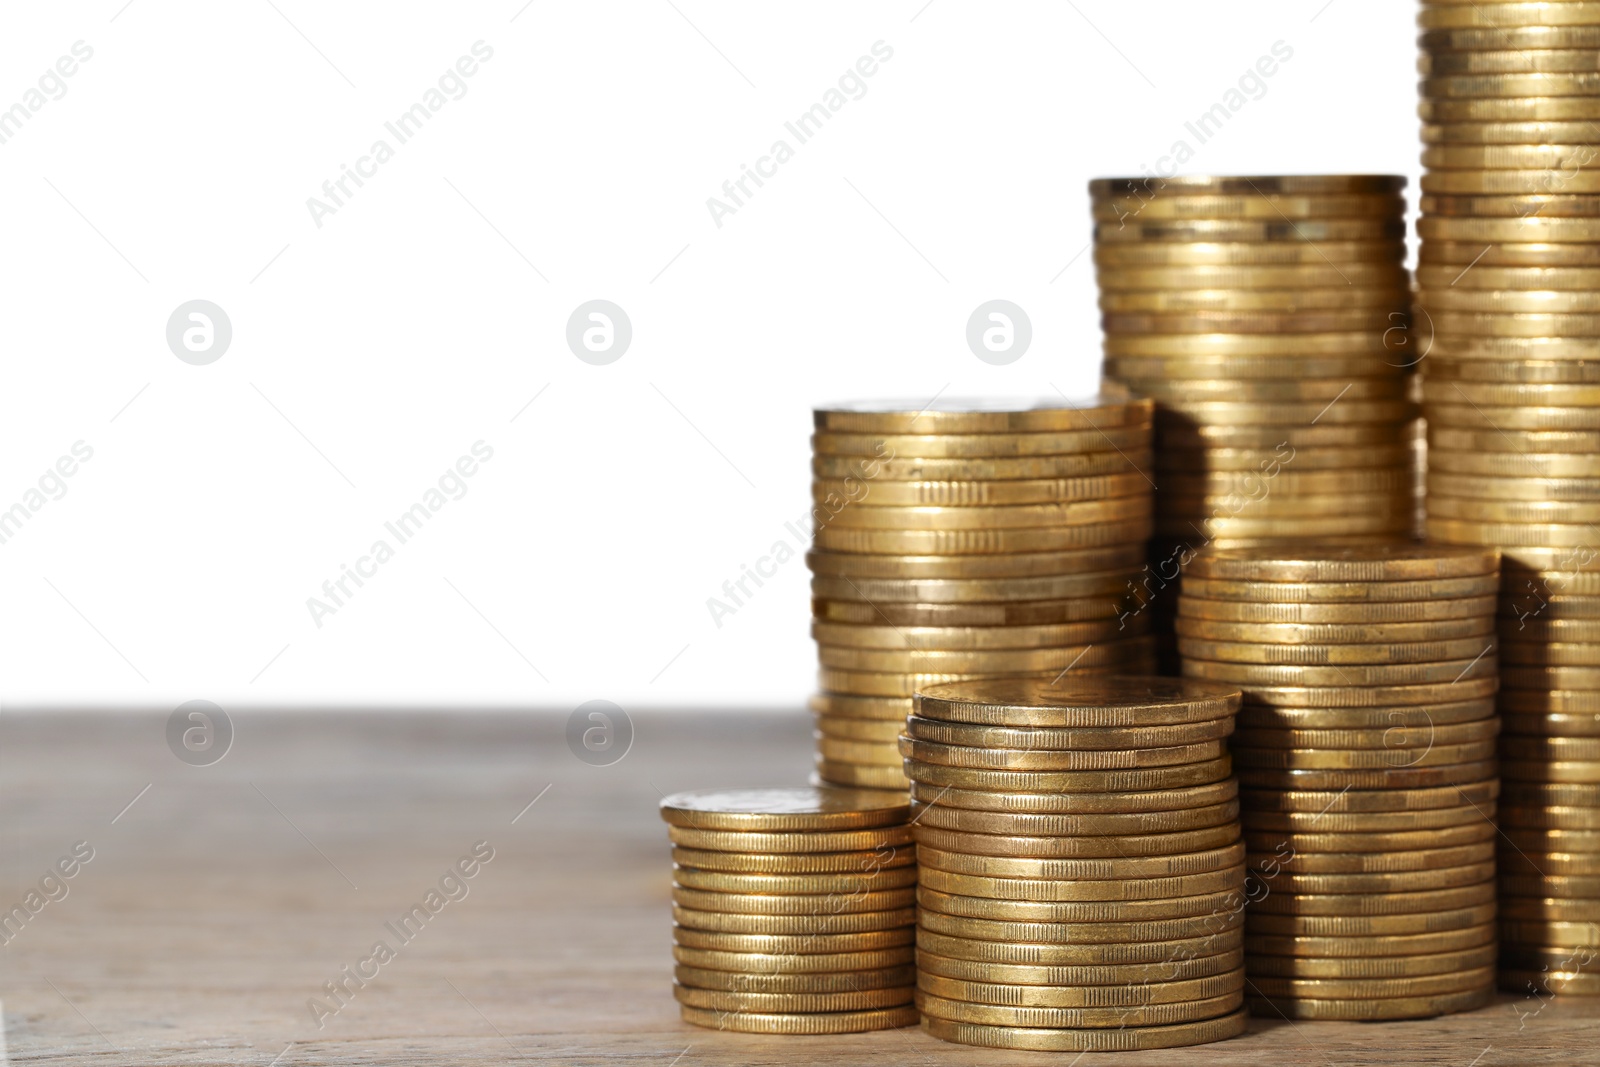 Photo of Many golden coins stacked on wooden table against white background